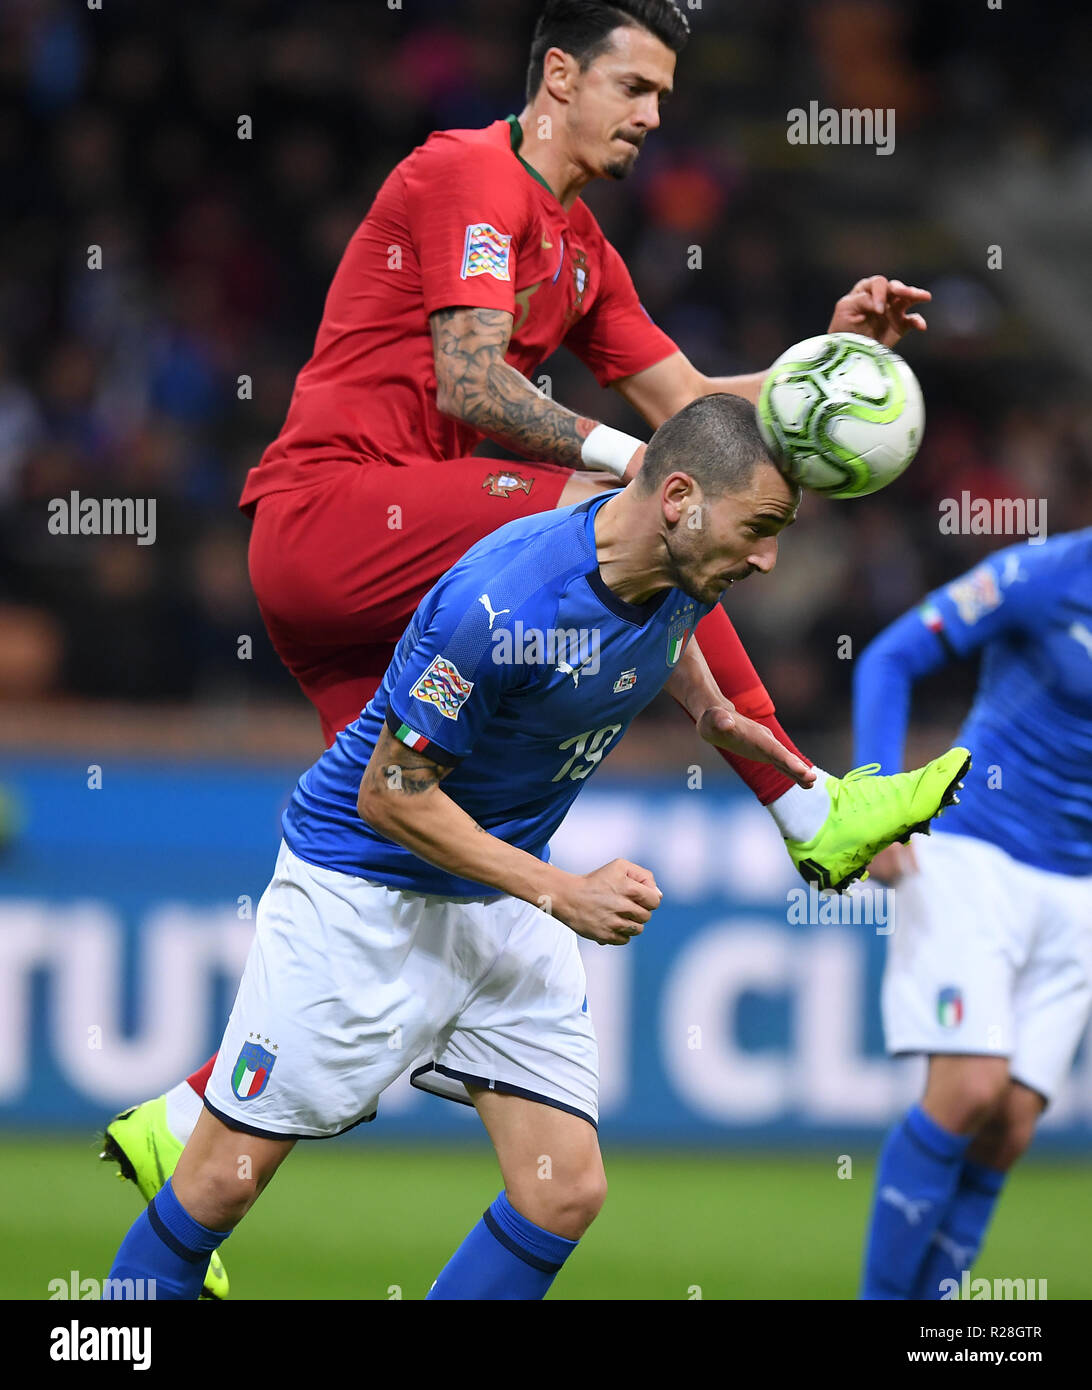 Milan, Italy. 17th Nov, 2018. Italy's Leonardo Bonucci (R) vies with Portugal's Jose Fonte during the UEFA Nations League soccer match between Italy and Portugal in Milan, Italy, Nov. 17, 2018. The match ended with a 0-0 draw. Credit: Alberto Lingria/Xinhua/Alamy Live News Stock Photo